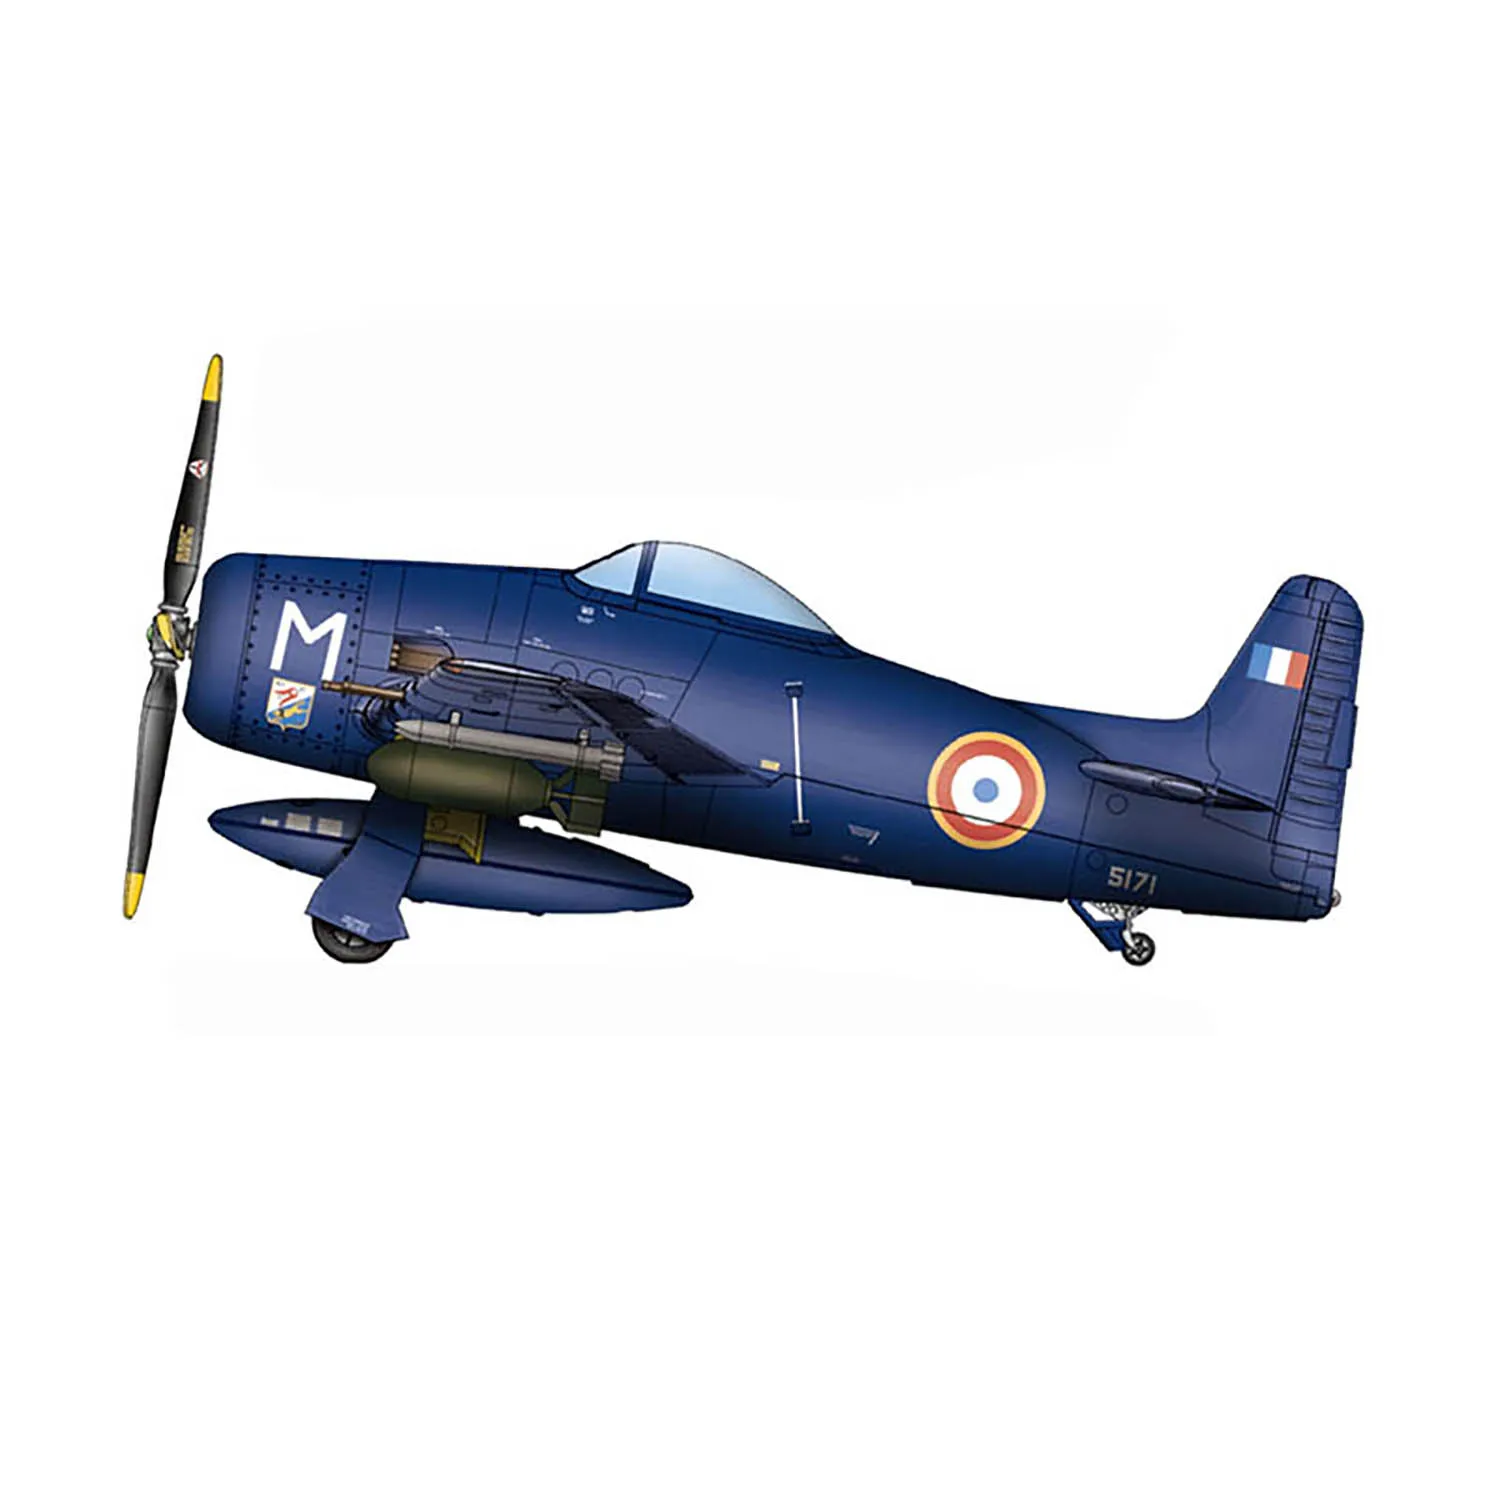 

Toys Hobby Boss 87268 1/72 F8F-1B Bearcat Static Model Fighter Airplane Aircraft Kit for Collecting TH20201-SMT2